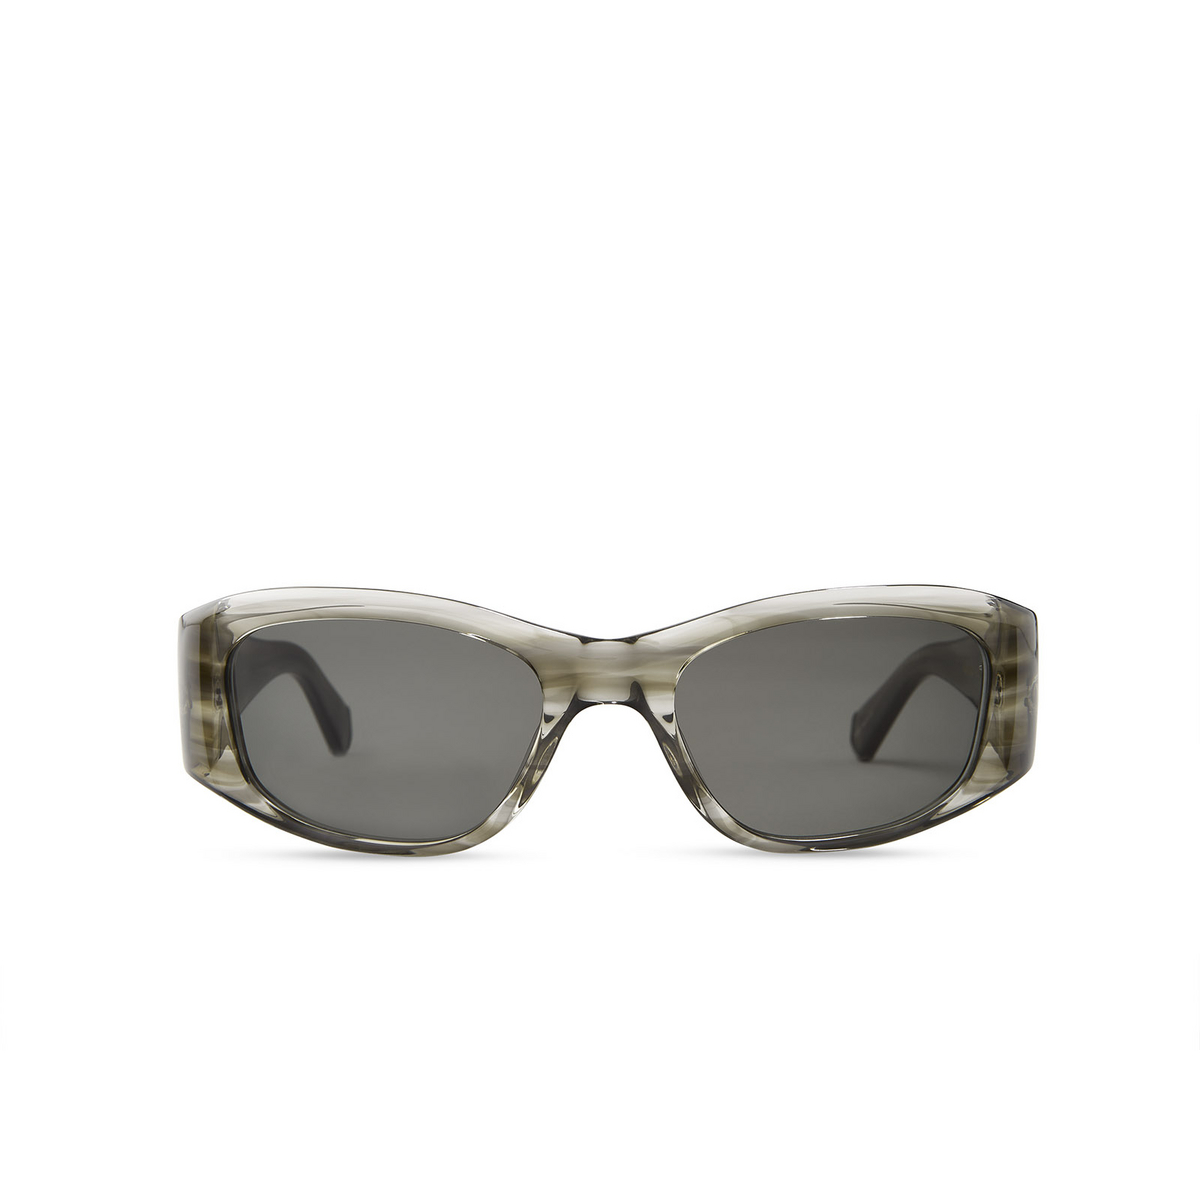 Mr. Leight ALOHA DOC S Sunglasses CSTGRY-PW/G15 Celestial Grey-Pewter - front view